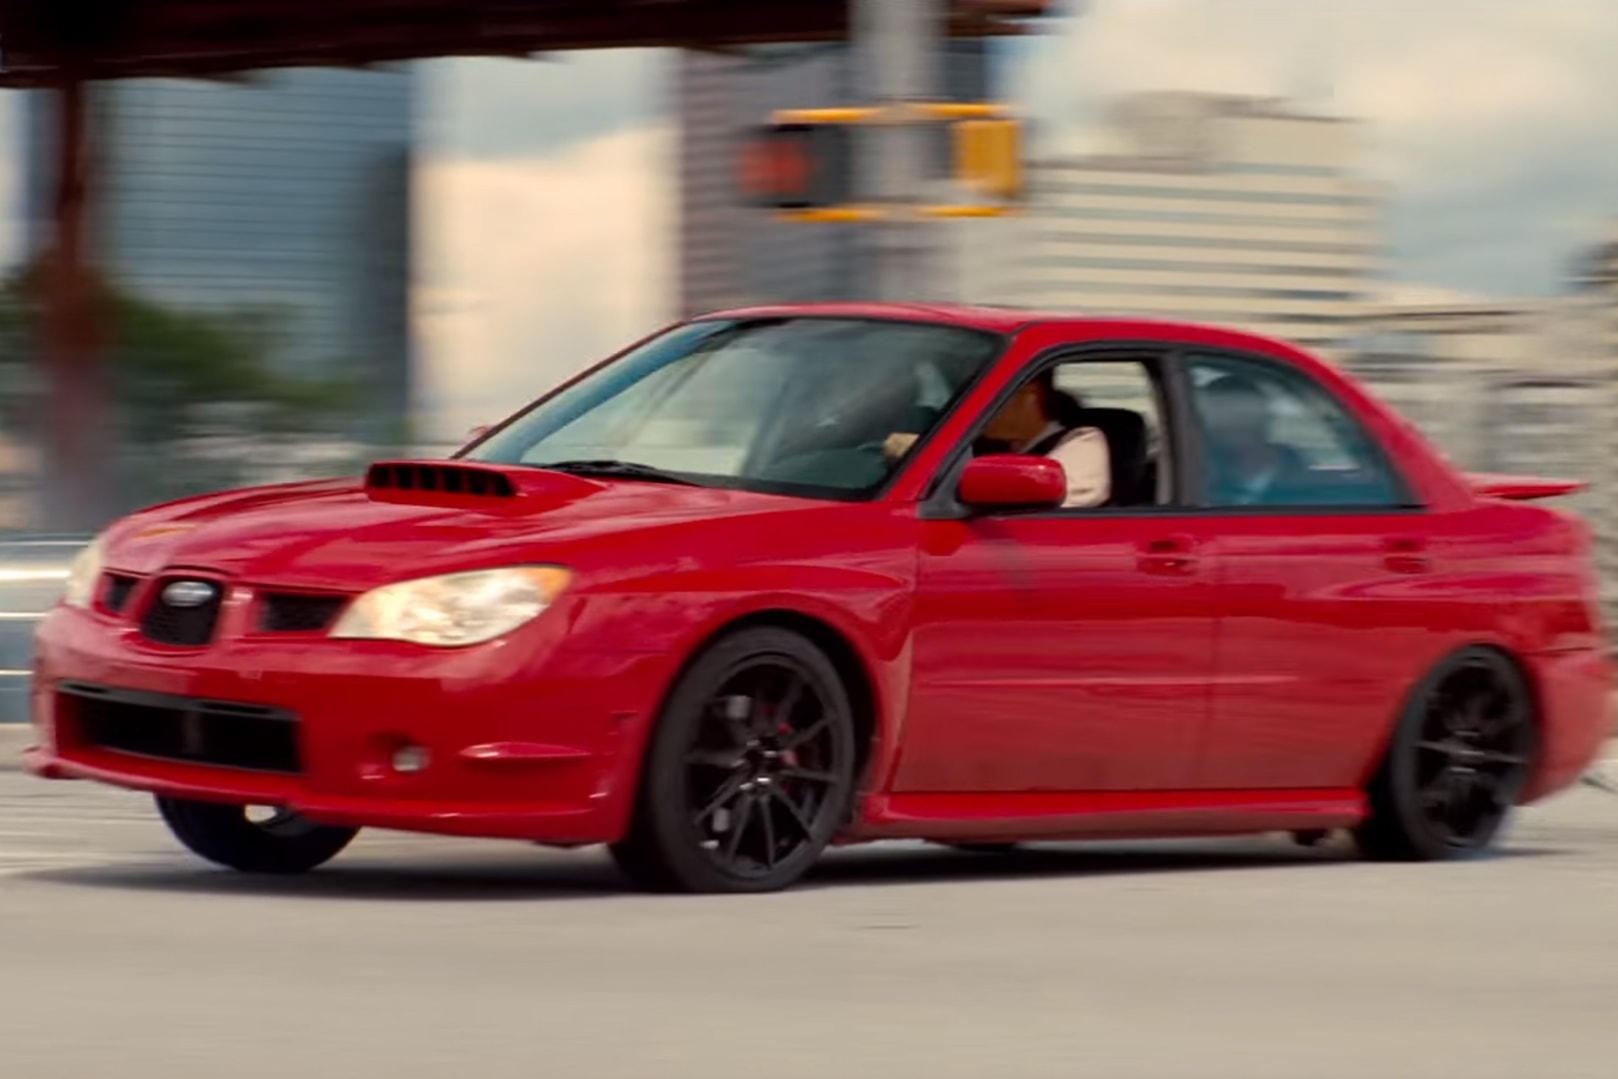 Red Subaru Impreza WRX From Baby Driver Sells On eBay for $69,000 USD